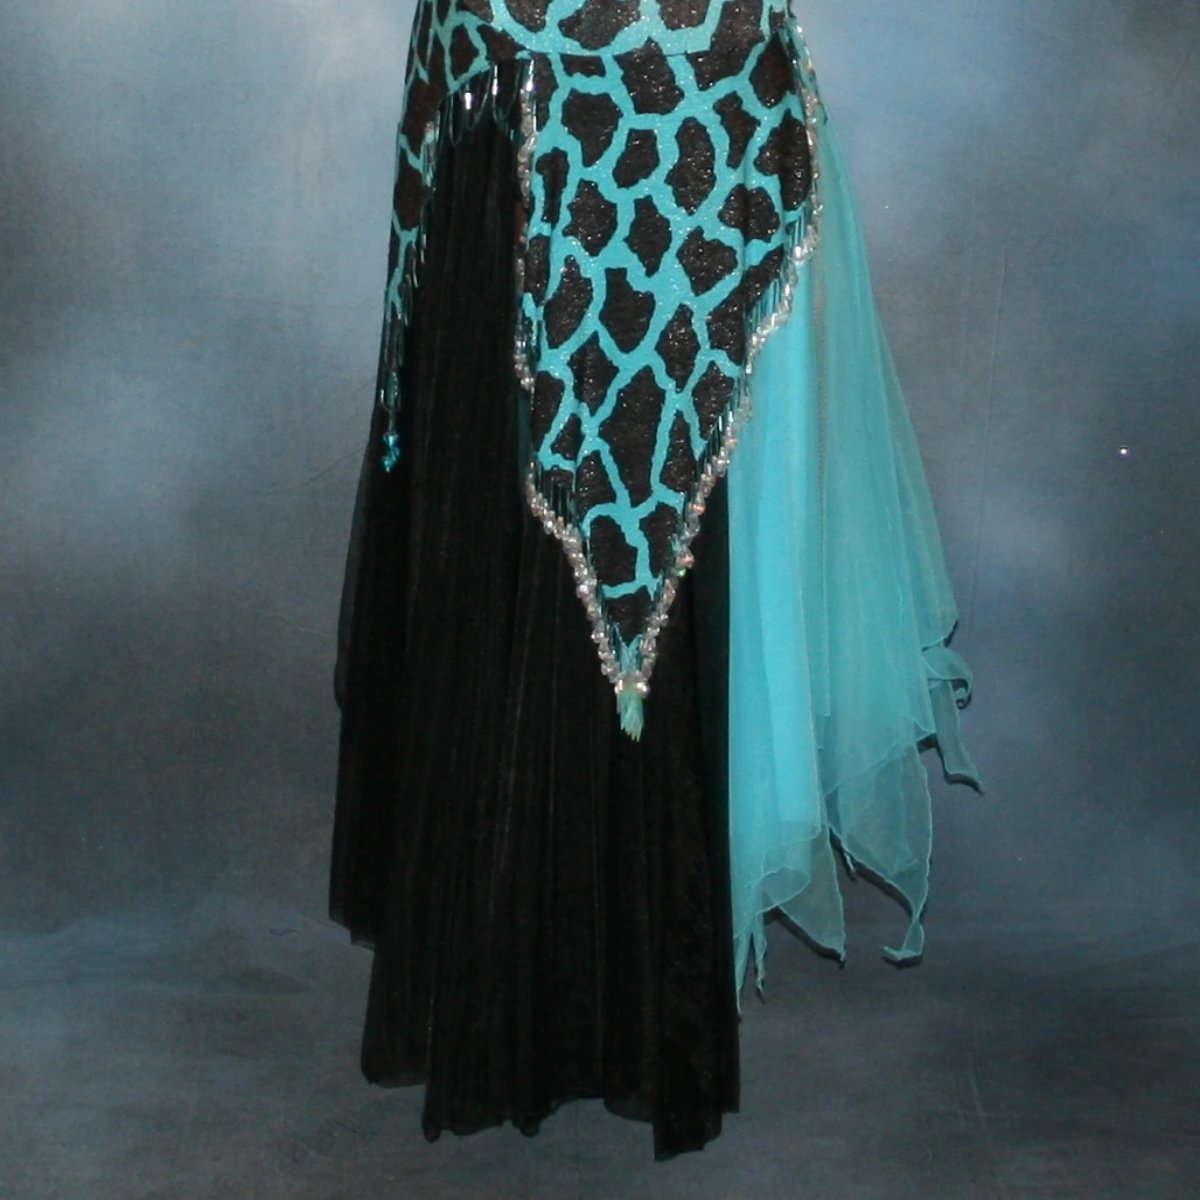 lower side view of Black & turquoise tango dress created in an animal print glitter stretch fabric with black chiffon tricot panels embellished with light turquoise Swarovski rhinestones at high neck & bugle bead hand beading is fabulous for tangos, rumbas or boleros, with interesting panel skirting, low keyhole back and lots of hand beading throughout the skirt panels.